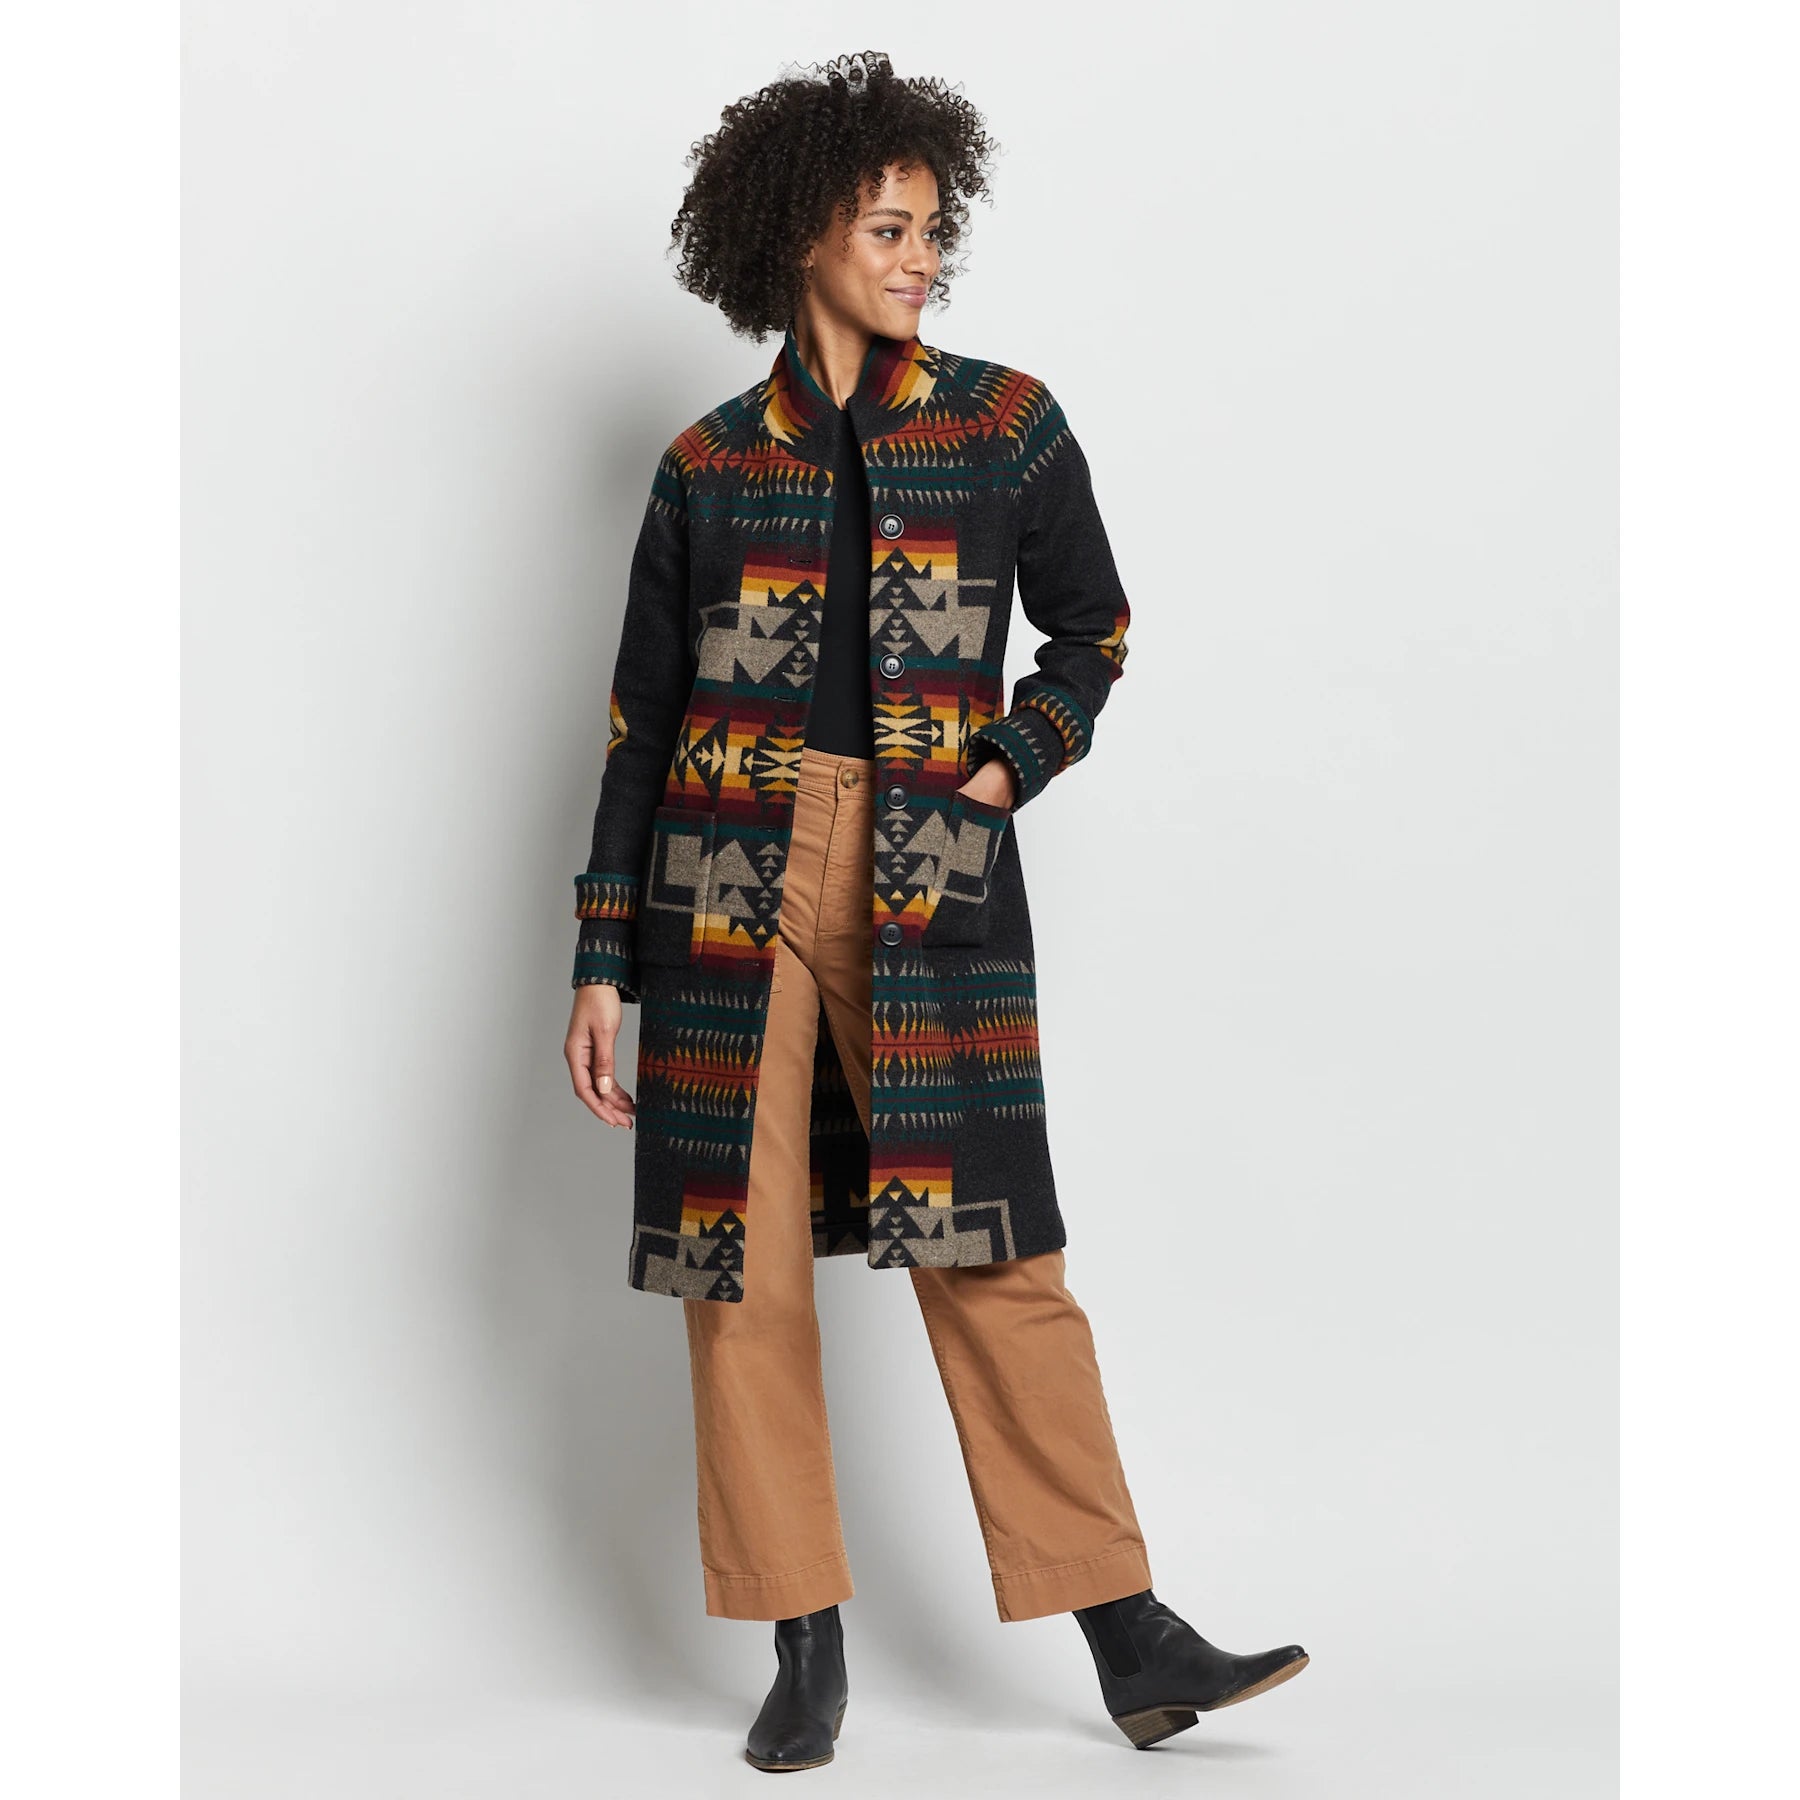 Pendleton womens long charcoal button down coat with rust, yellow and beige print.  Shown on model